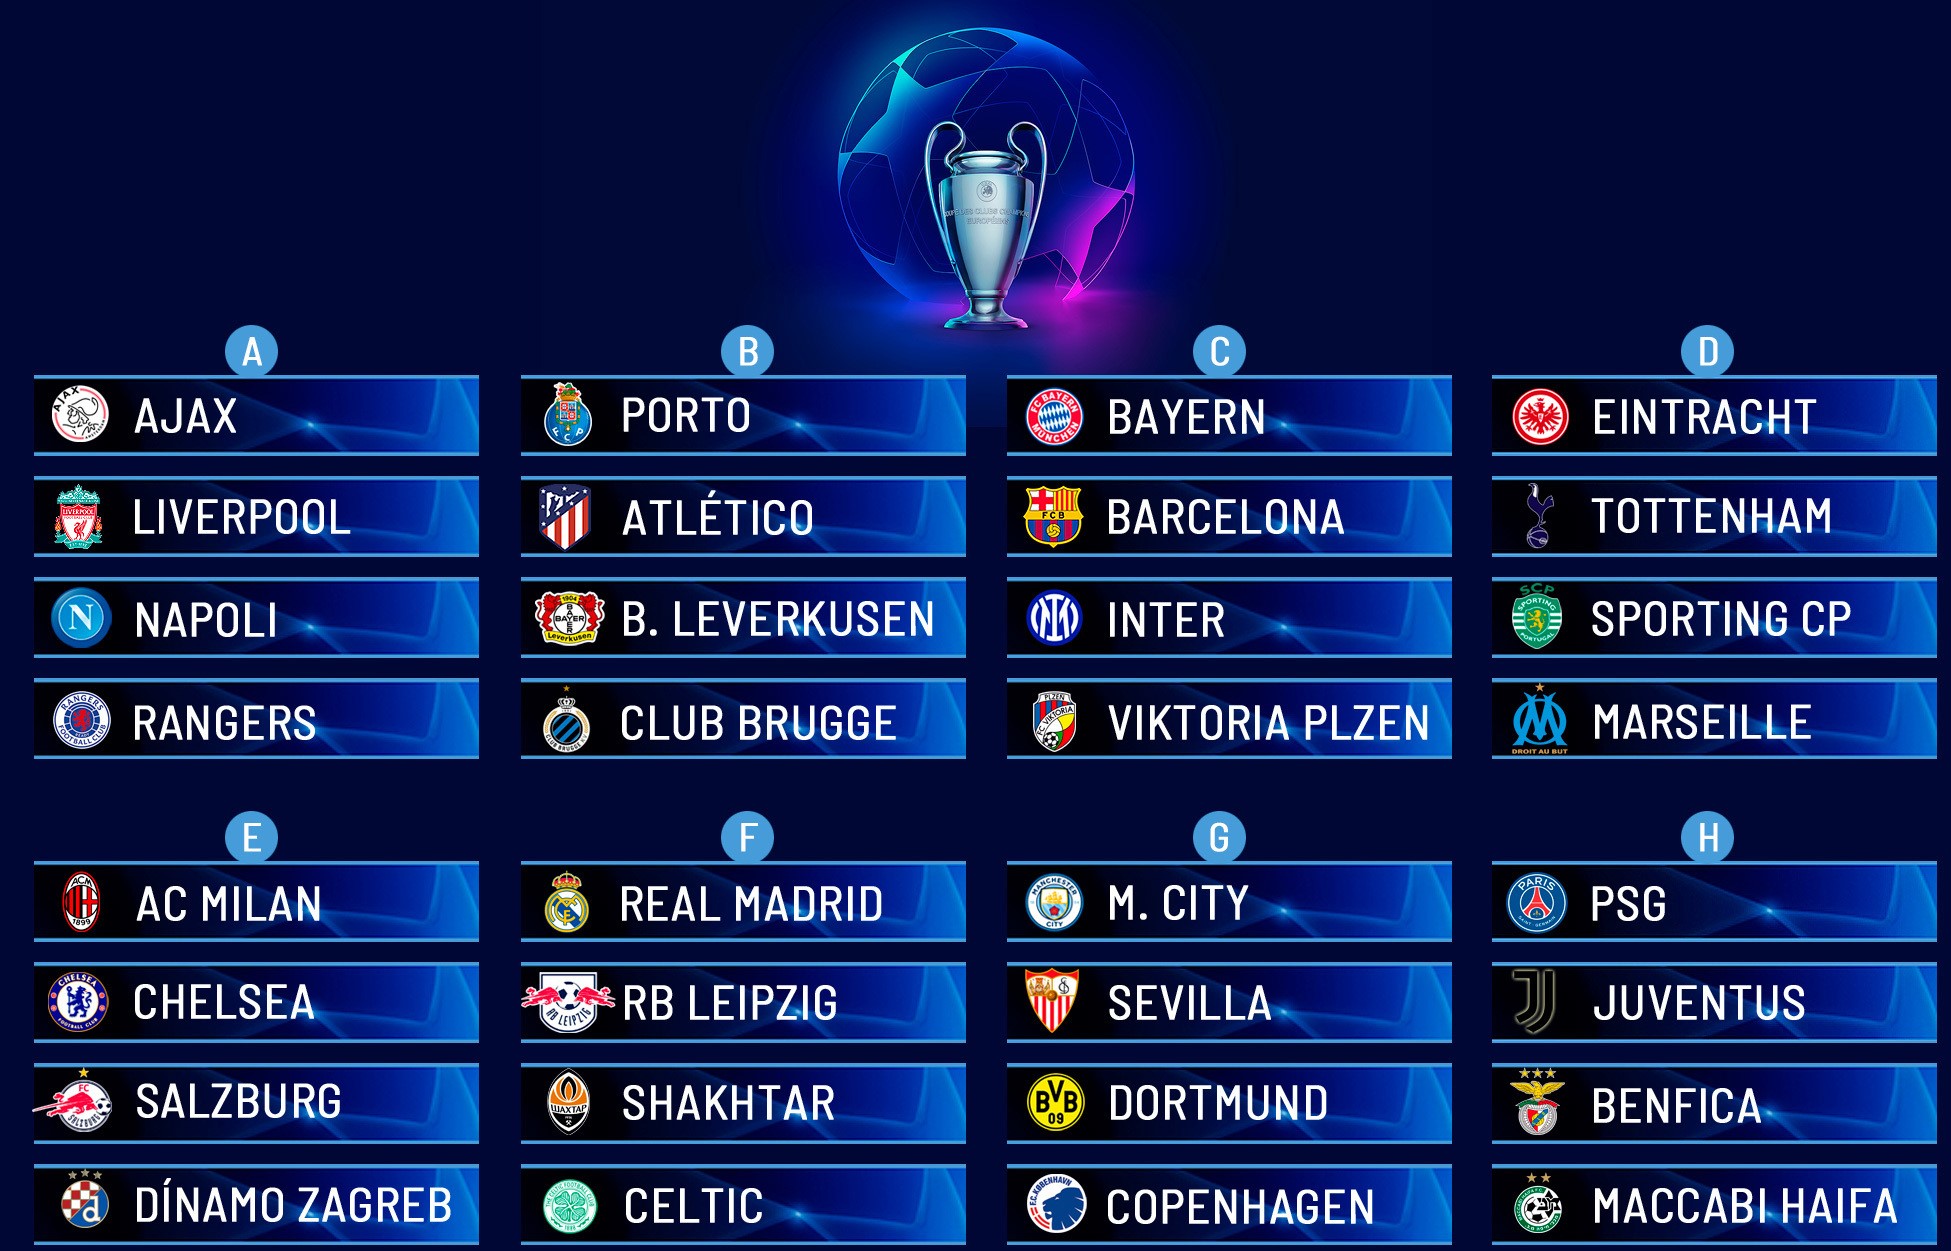 2022/23 UEFA Champions League draw results and storylines